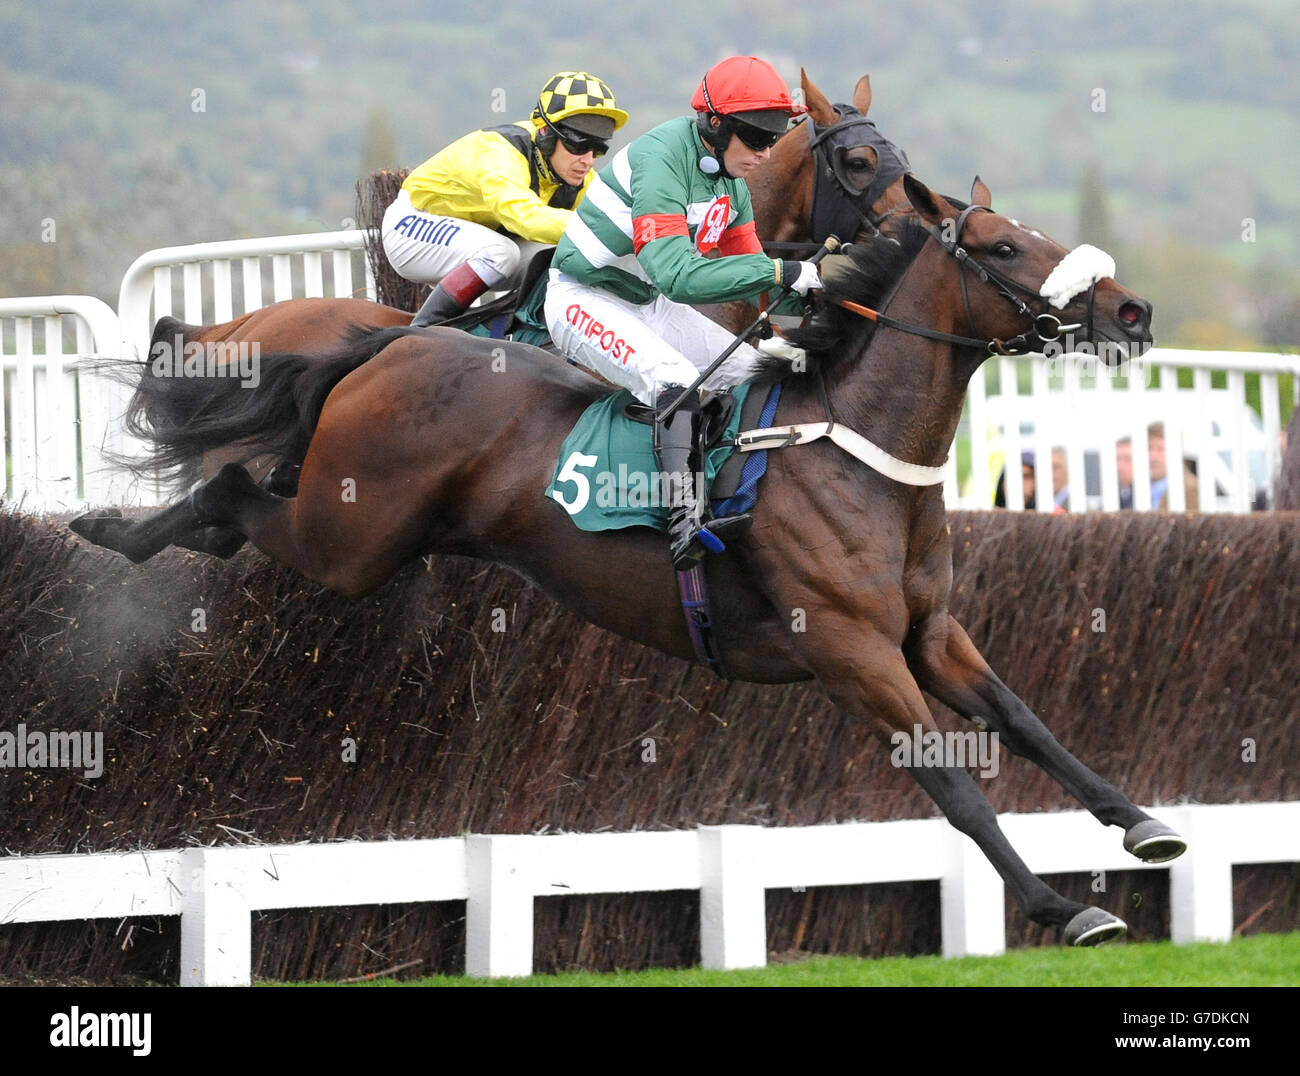 Highland Retreat ridden by Noel Fehily (front) and Lamb or Cod ridden by Richard Johnson compete in the Ryman Stationery Cheltenham Business Club Novices' Steeple Chase during day one of the 2014 Showcase meeting at Cheltenham Racecourse, Cheltenham. Stock Photo